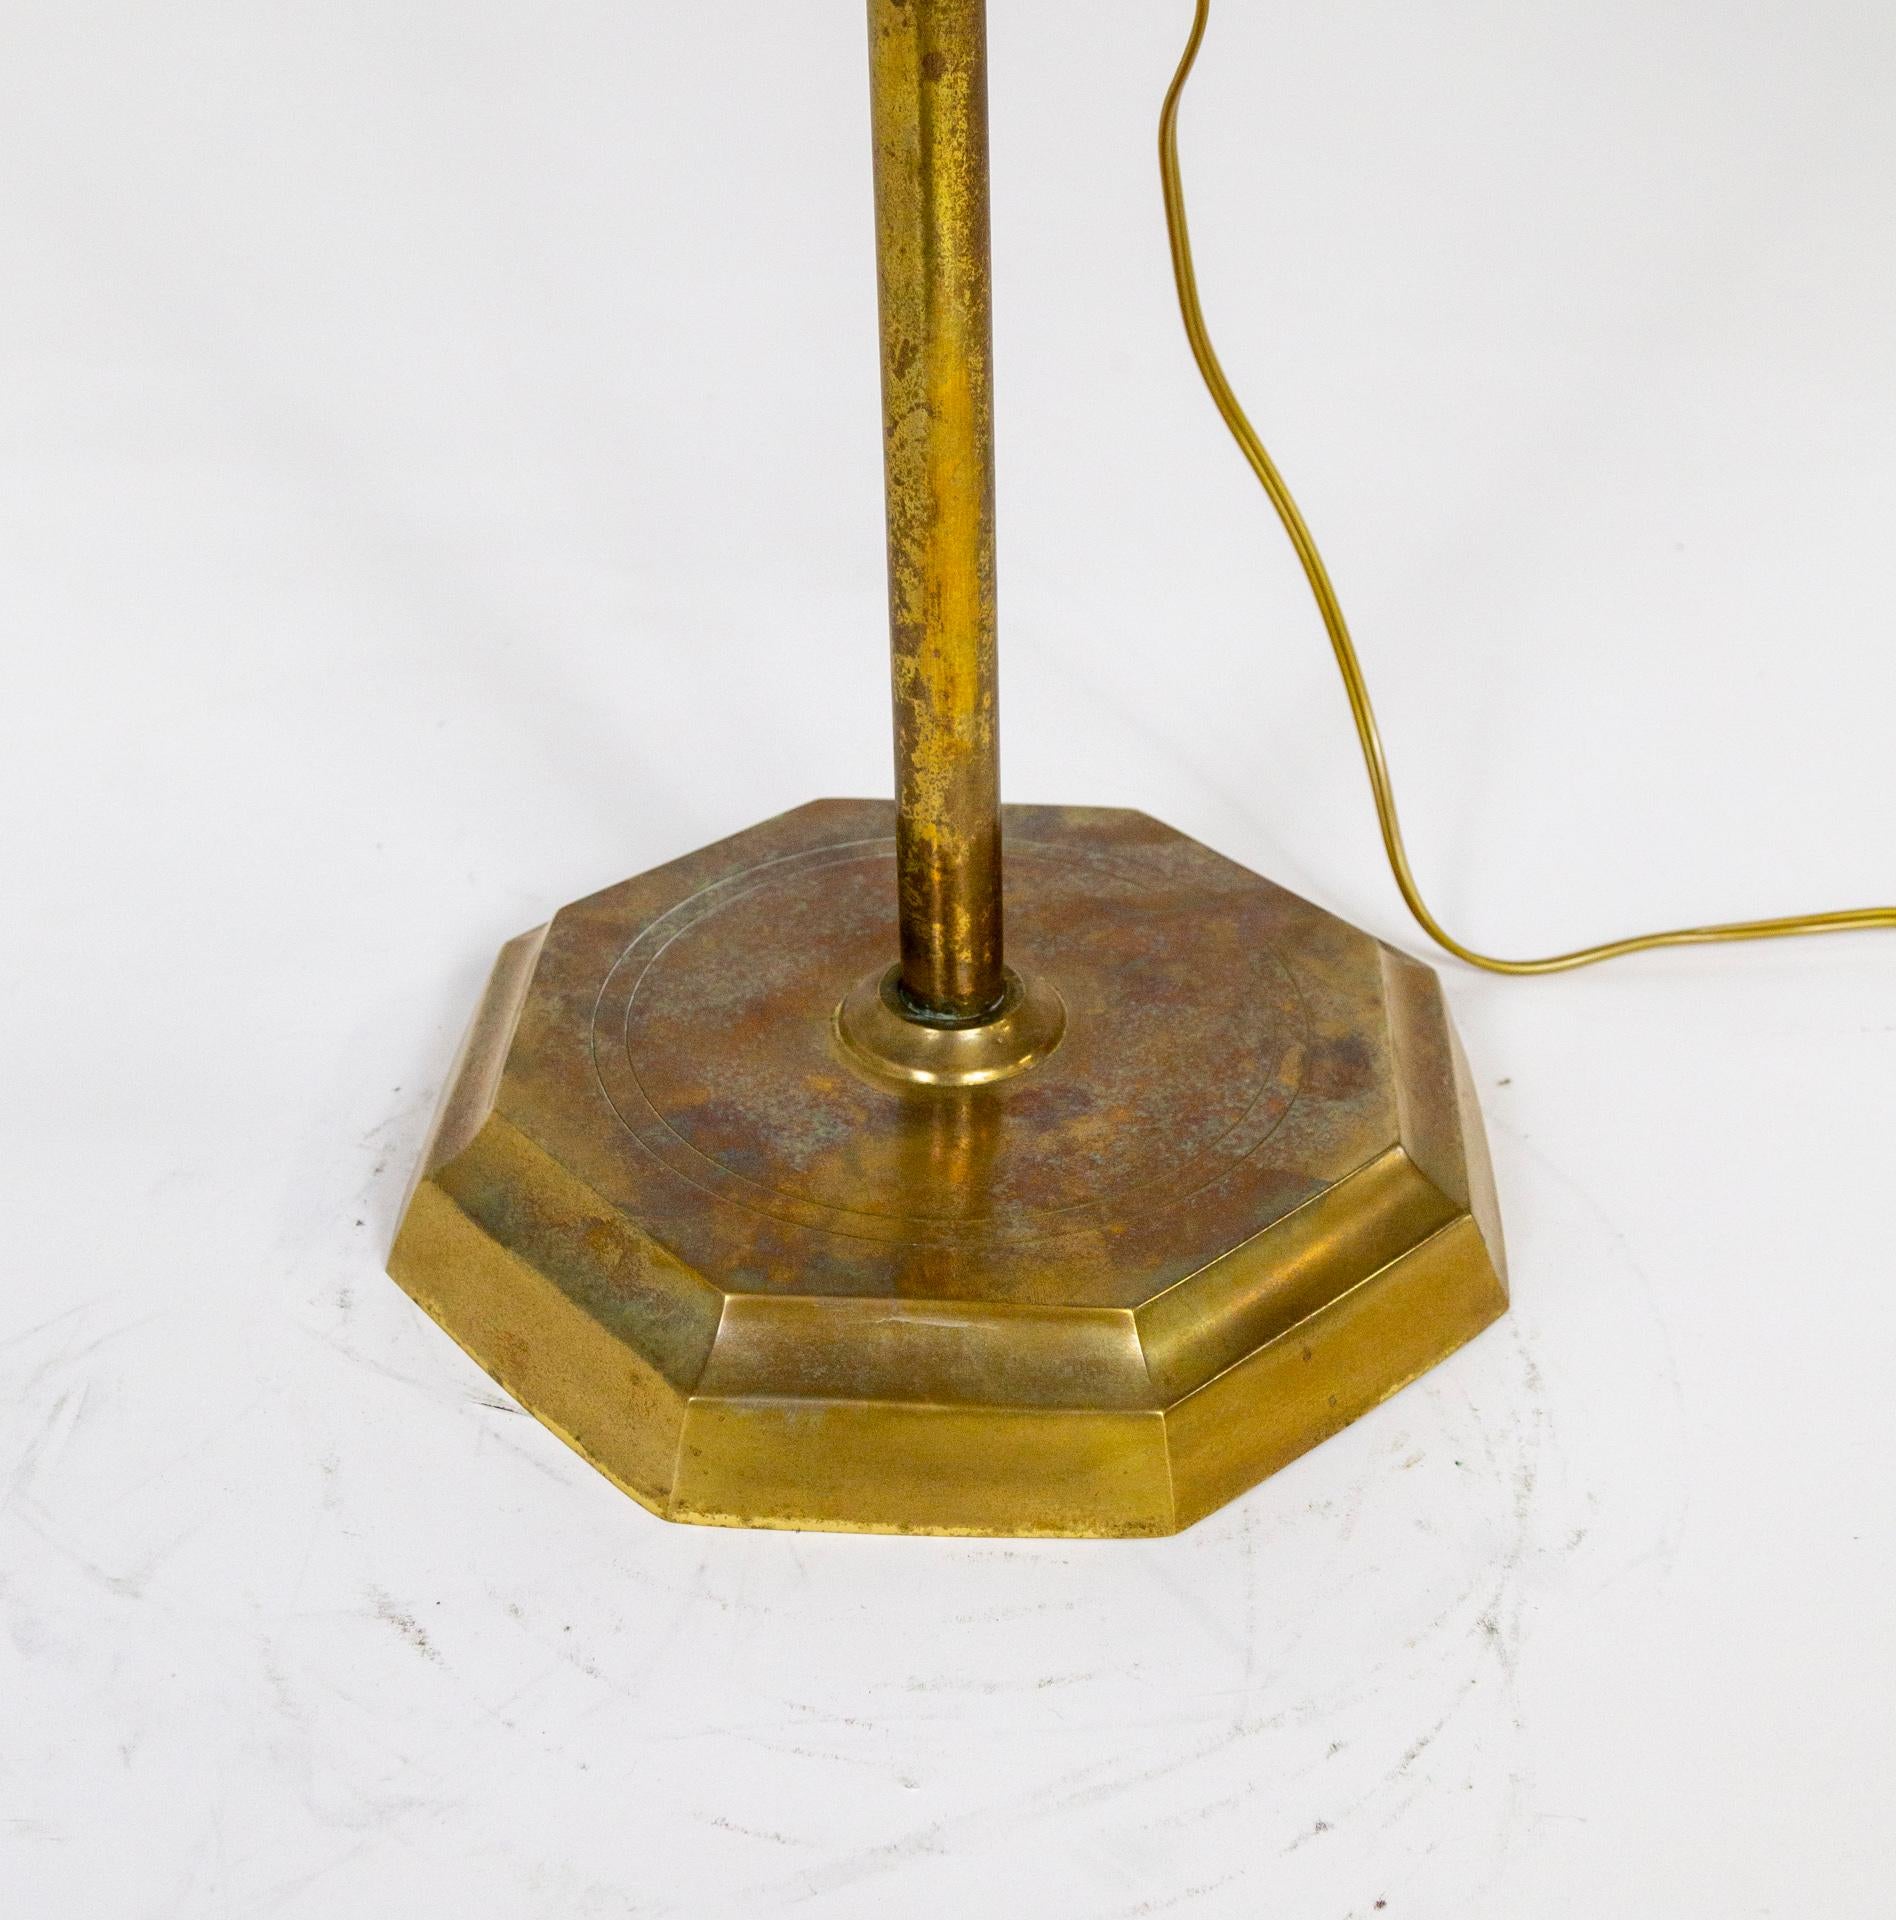 A vintage pharmacy-style floor lamp with adjustable shade and stem height. It is solid brass with a weighted, 8-sided base. The cast brass shade has an enameled white interior and can be adjusted to direct the light. Newly wired with a dimmer on the